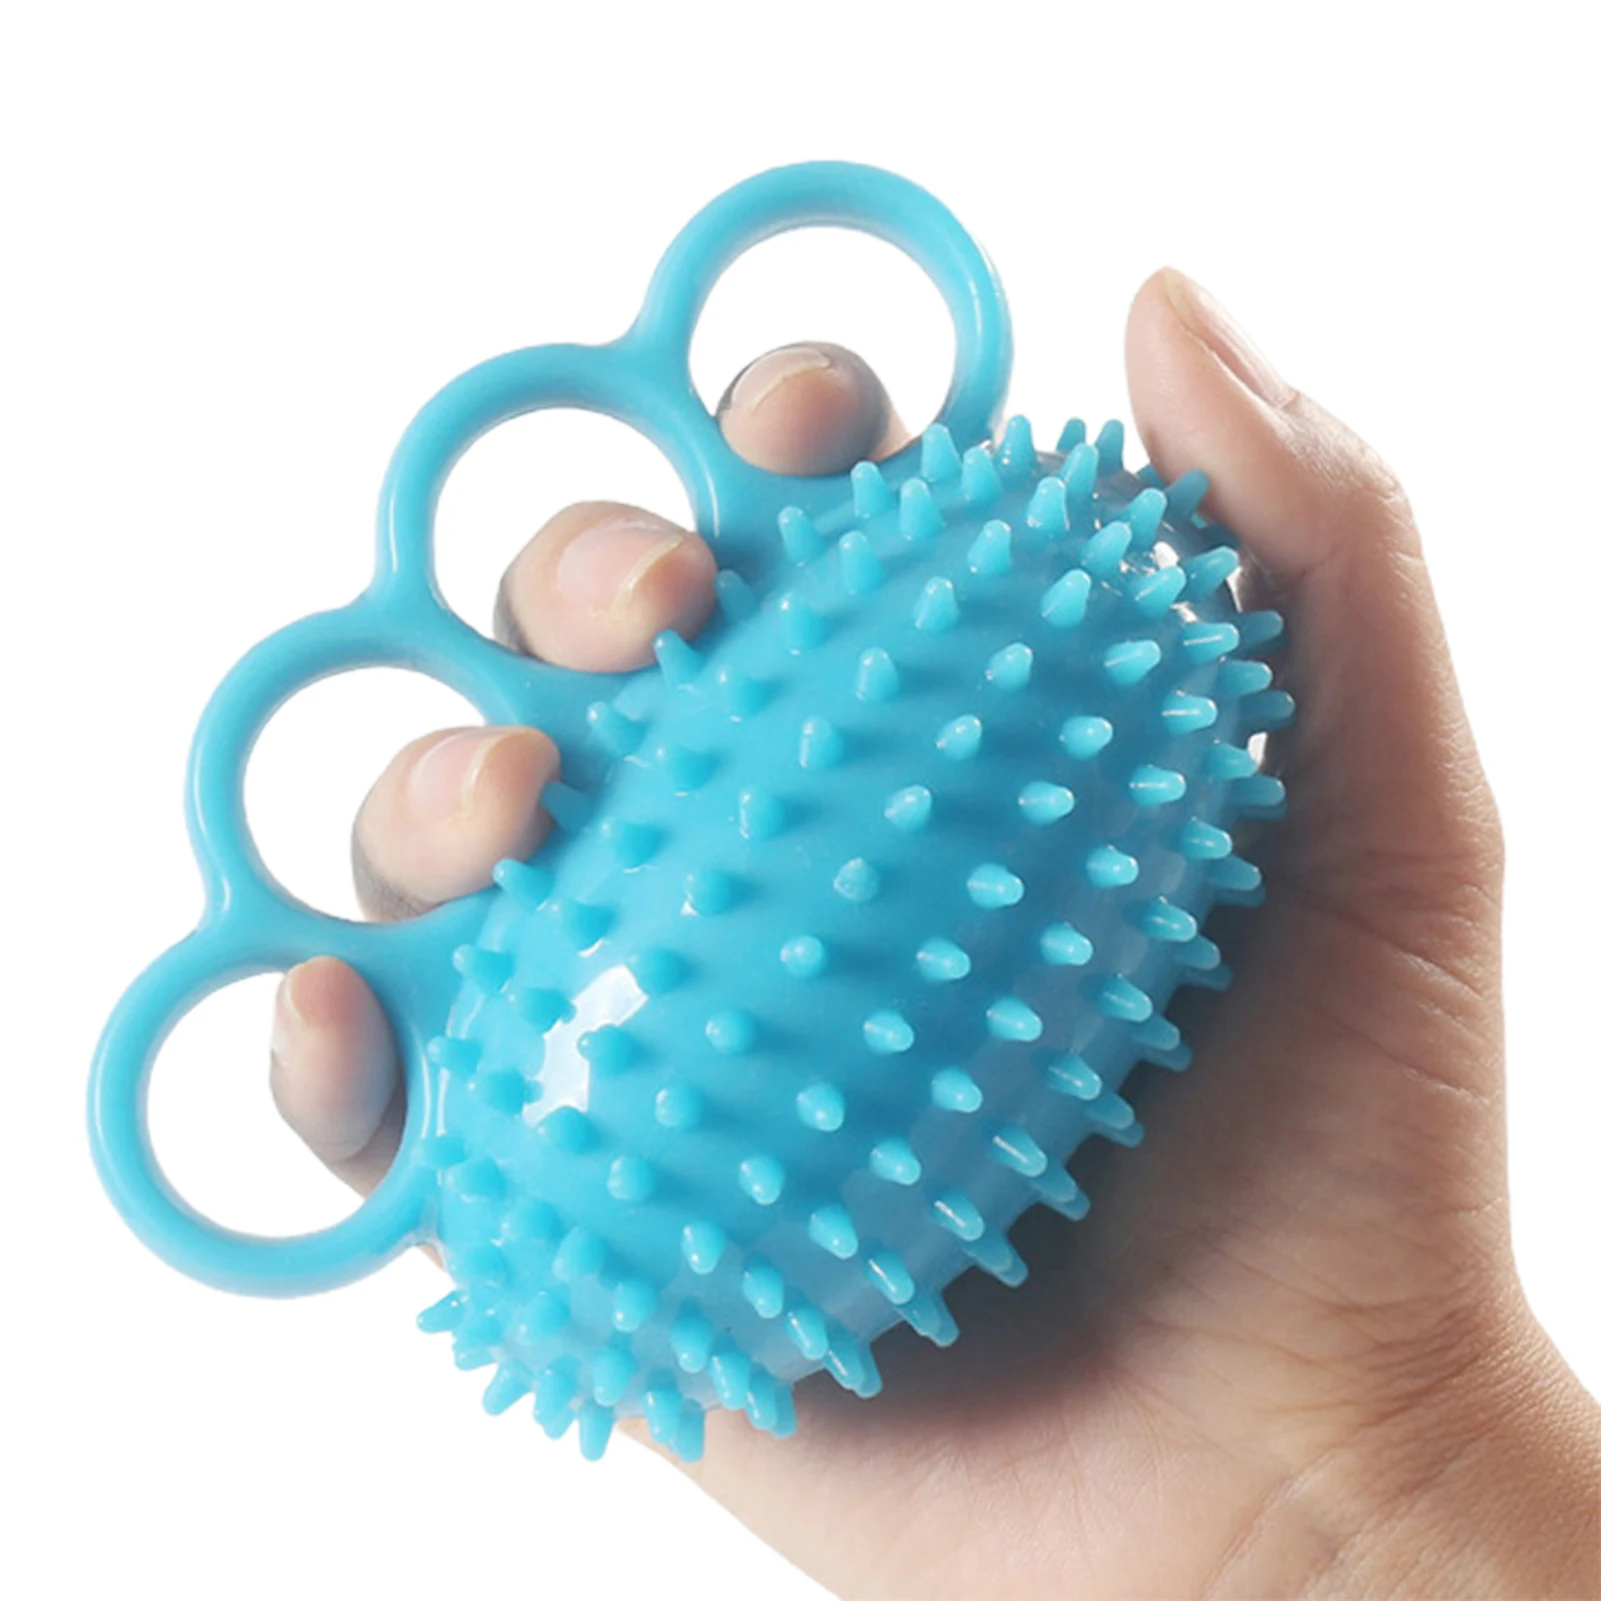 

Silicone Finger Grip Ball Massage Acupoint Rehabilitation Training Equipment Finger Strength Circle Grip Portable Fitness Ball